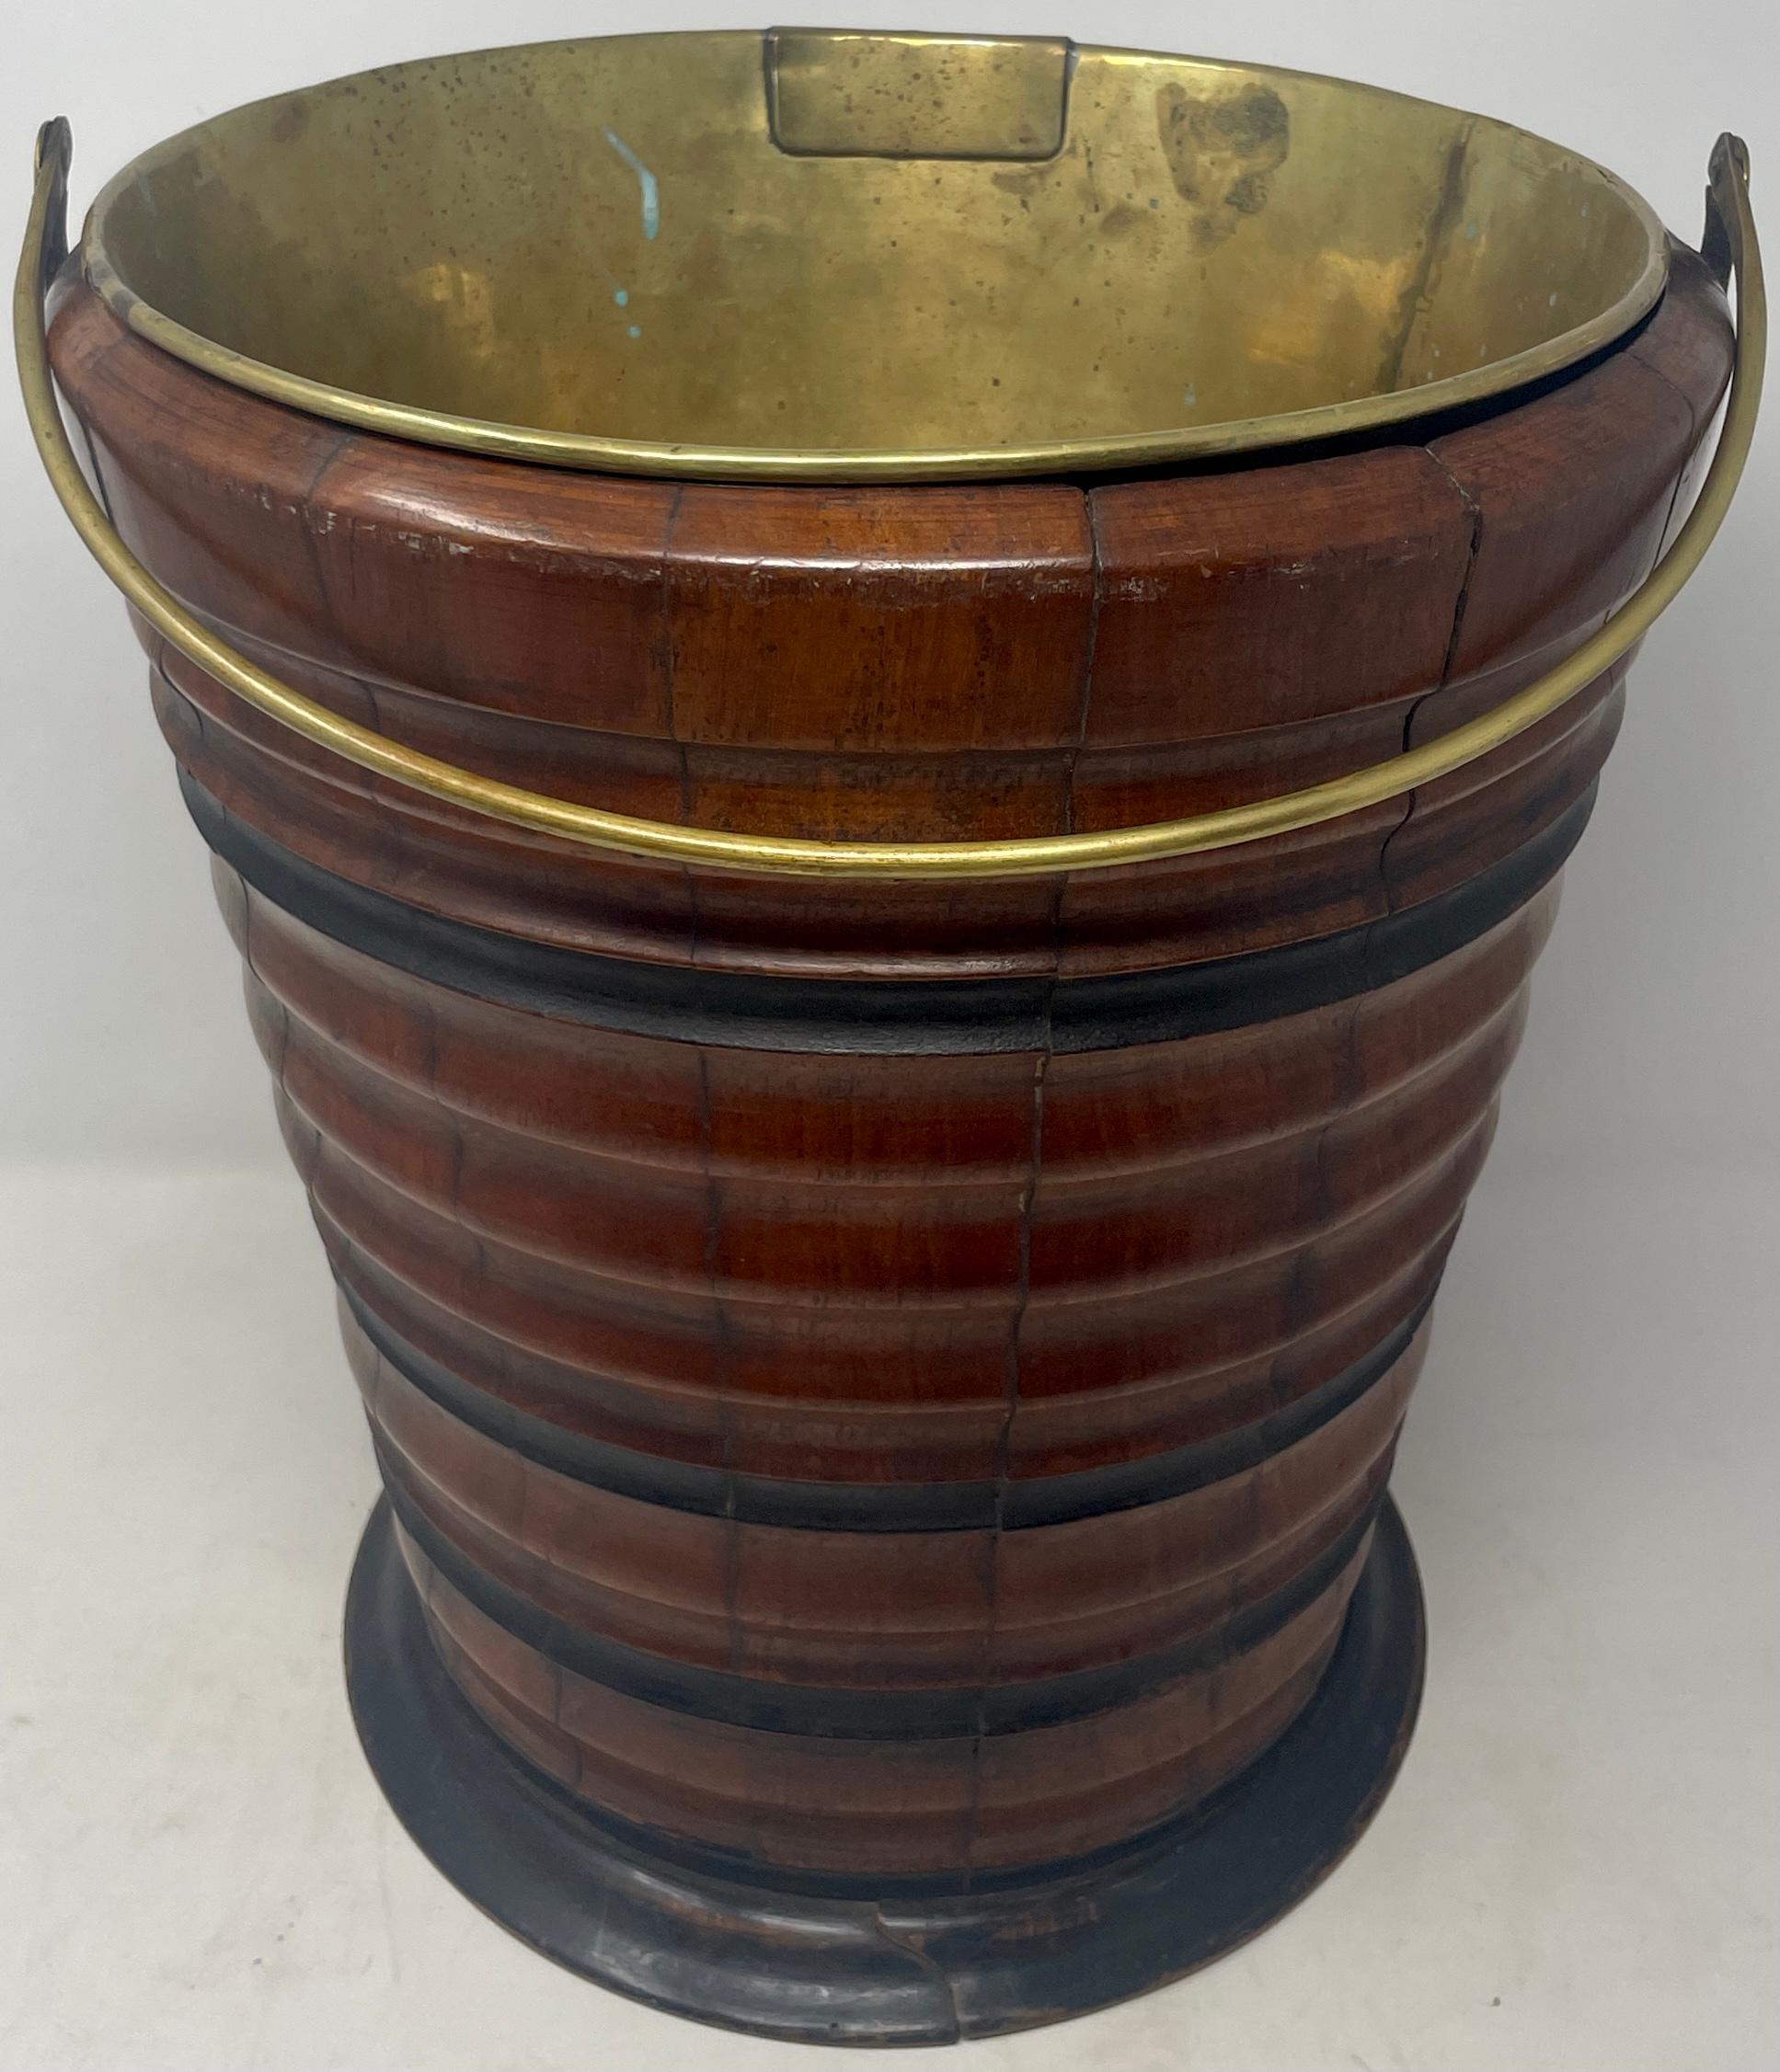 Handsome Antique English Victorian Mahogany peat bucket with brass Liner, Circa 1840-1860.